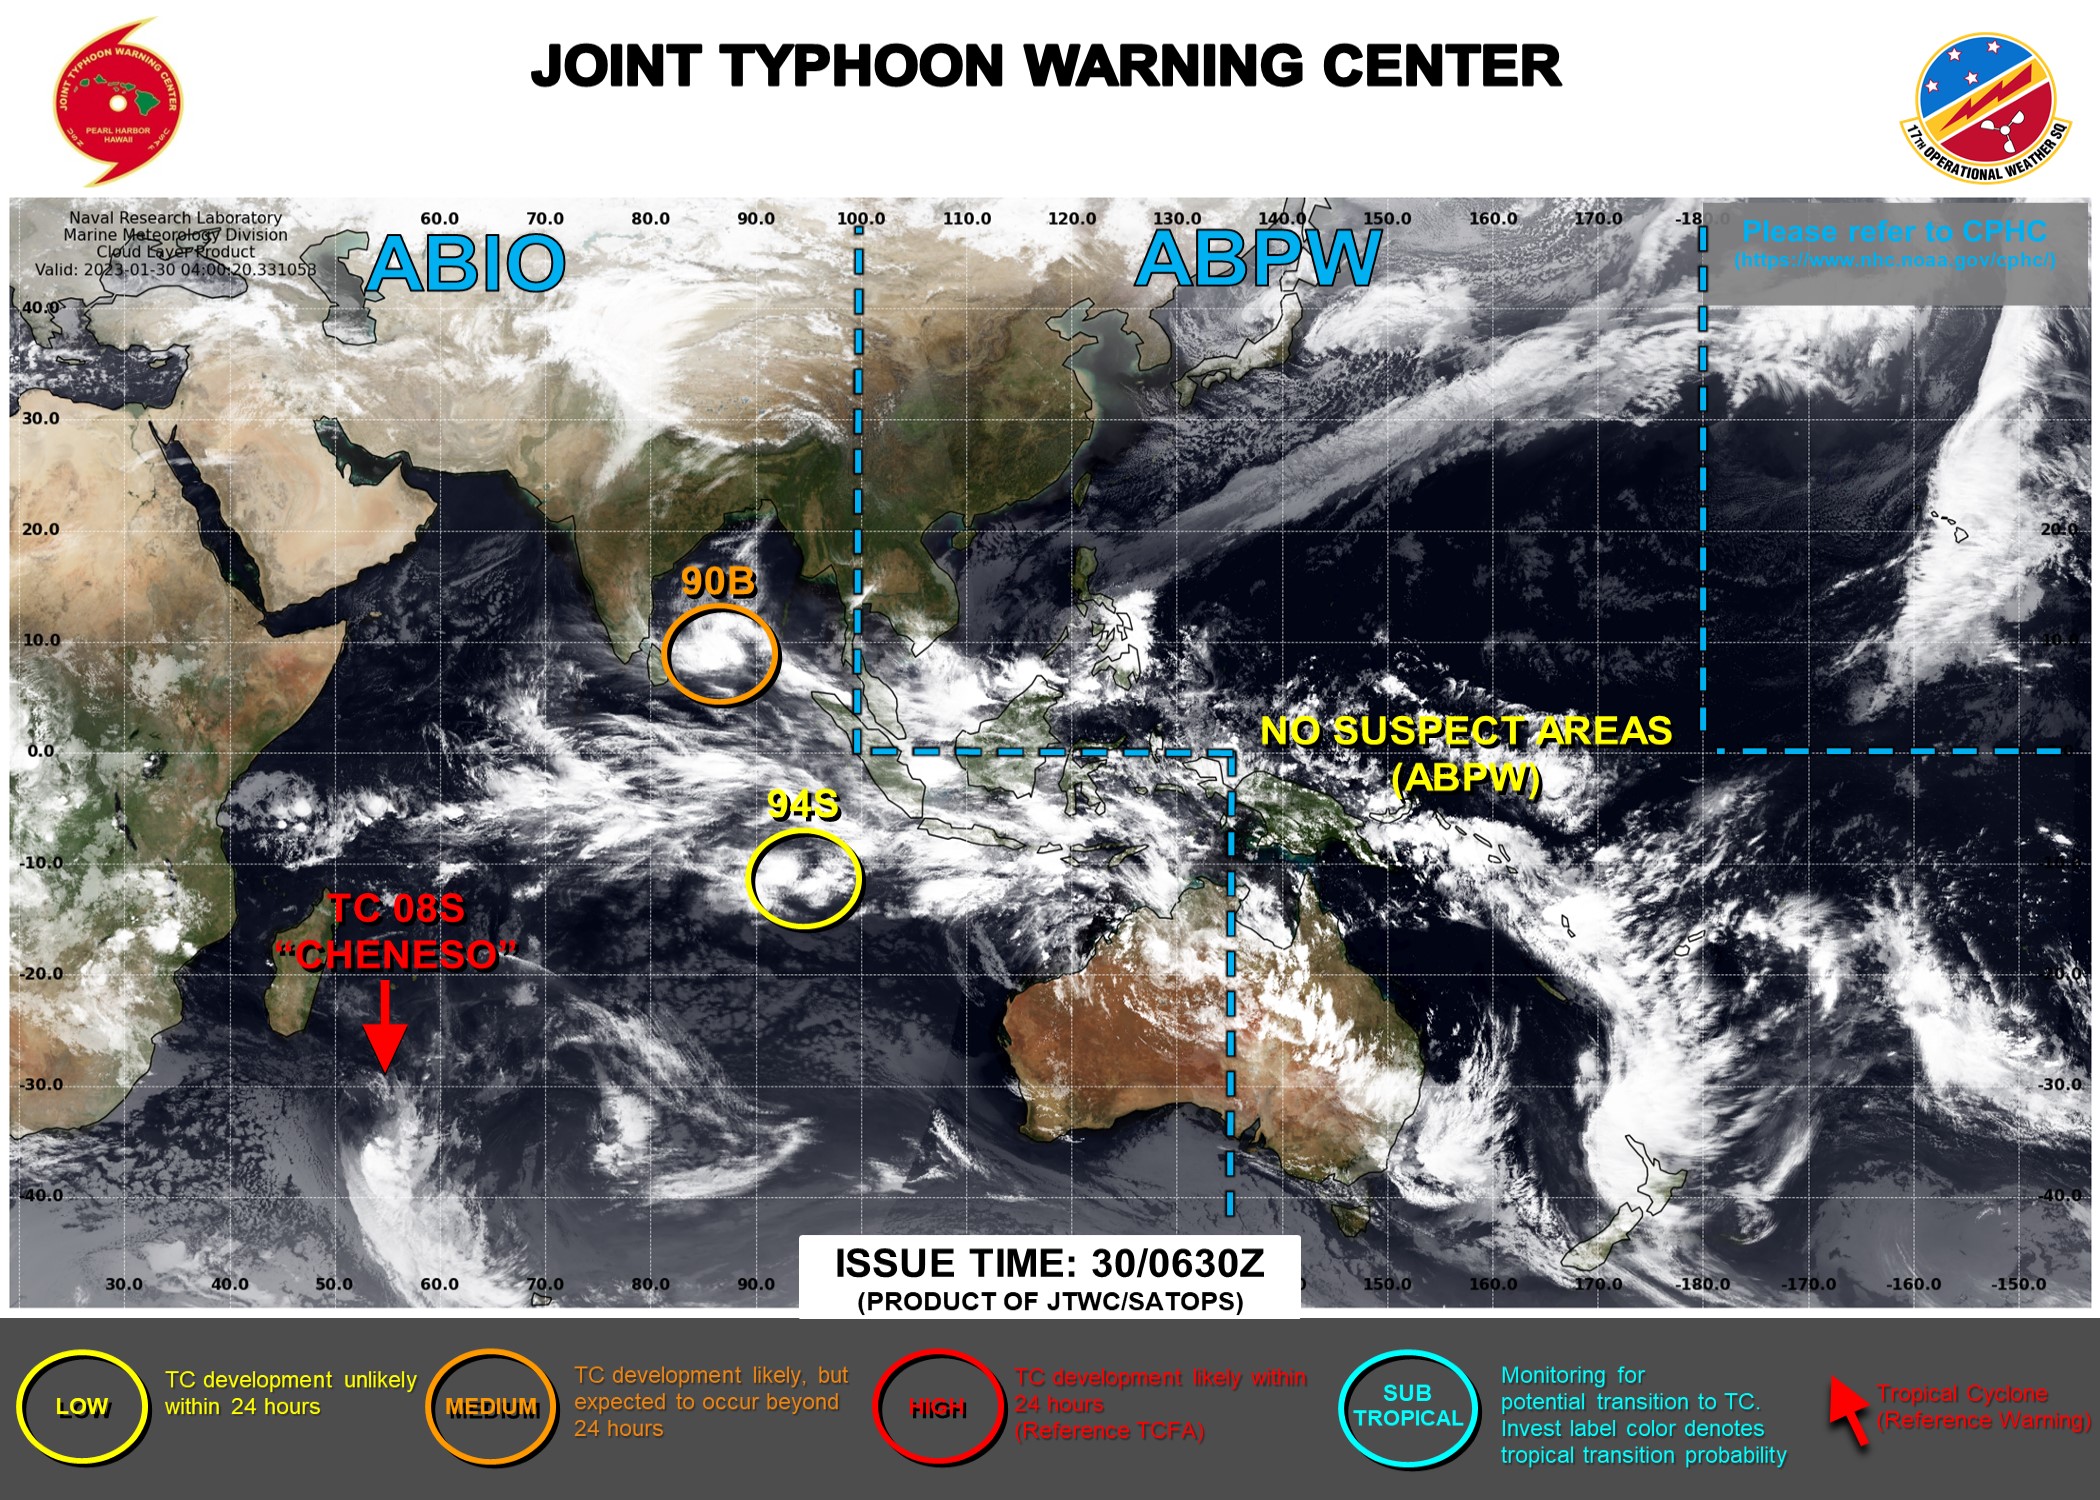 JTWC IS ISSUING 3HOURLY SATELLITE BULLETINS ON 08S(CHENESO) AND INVEST 90B.